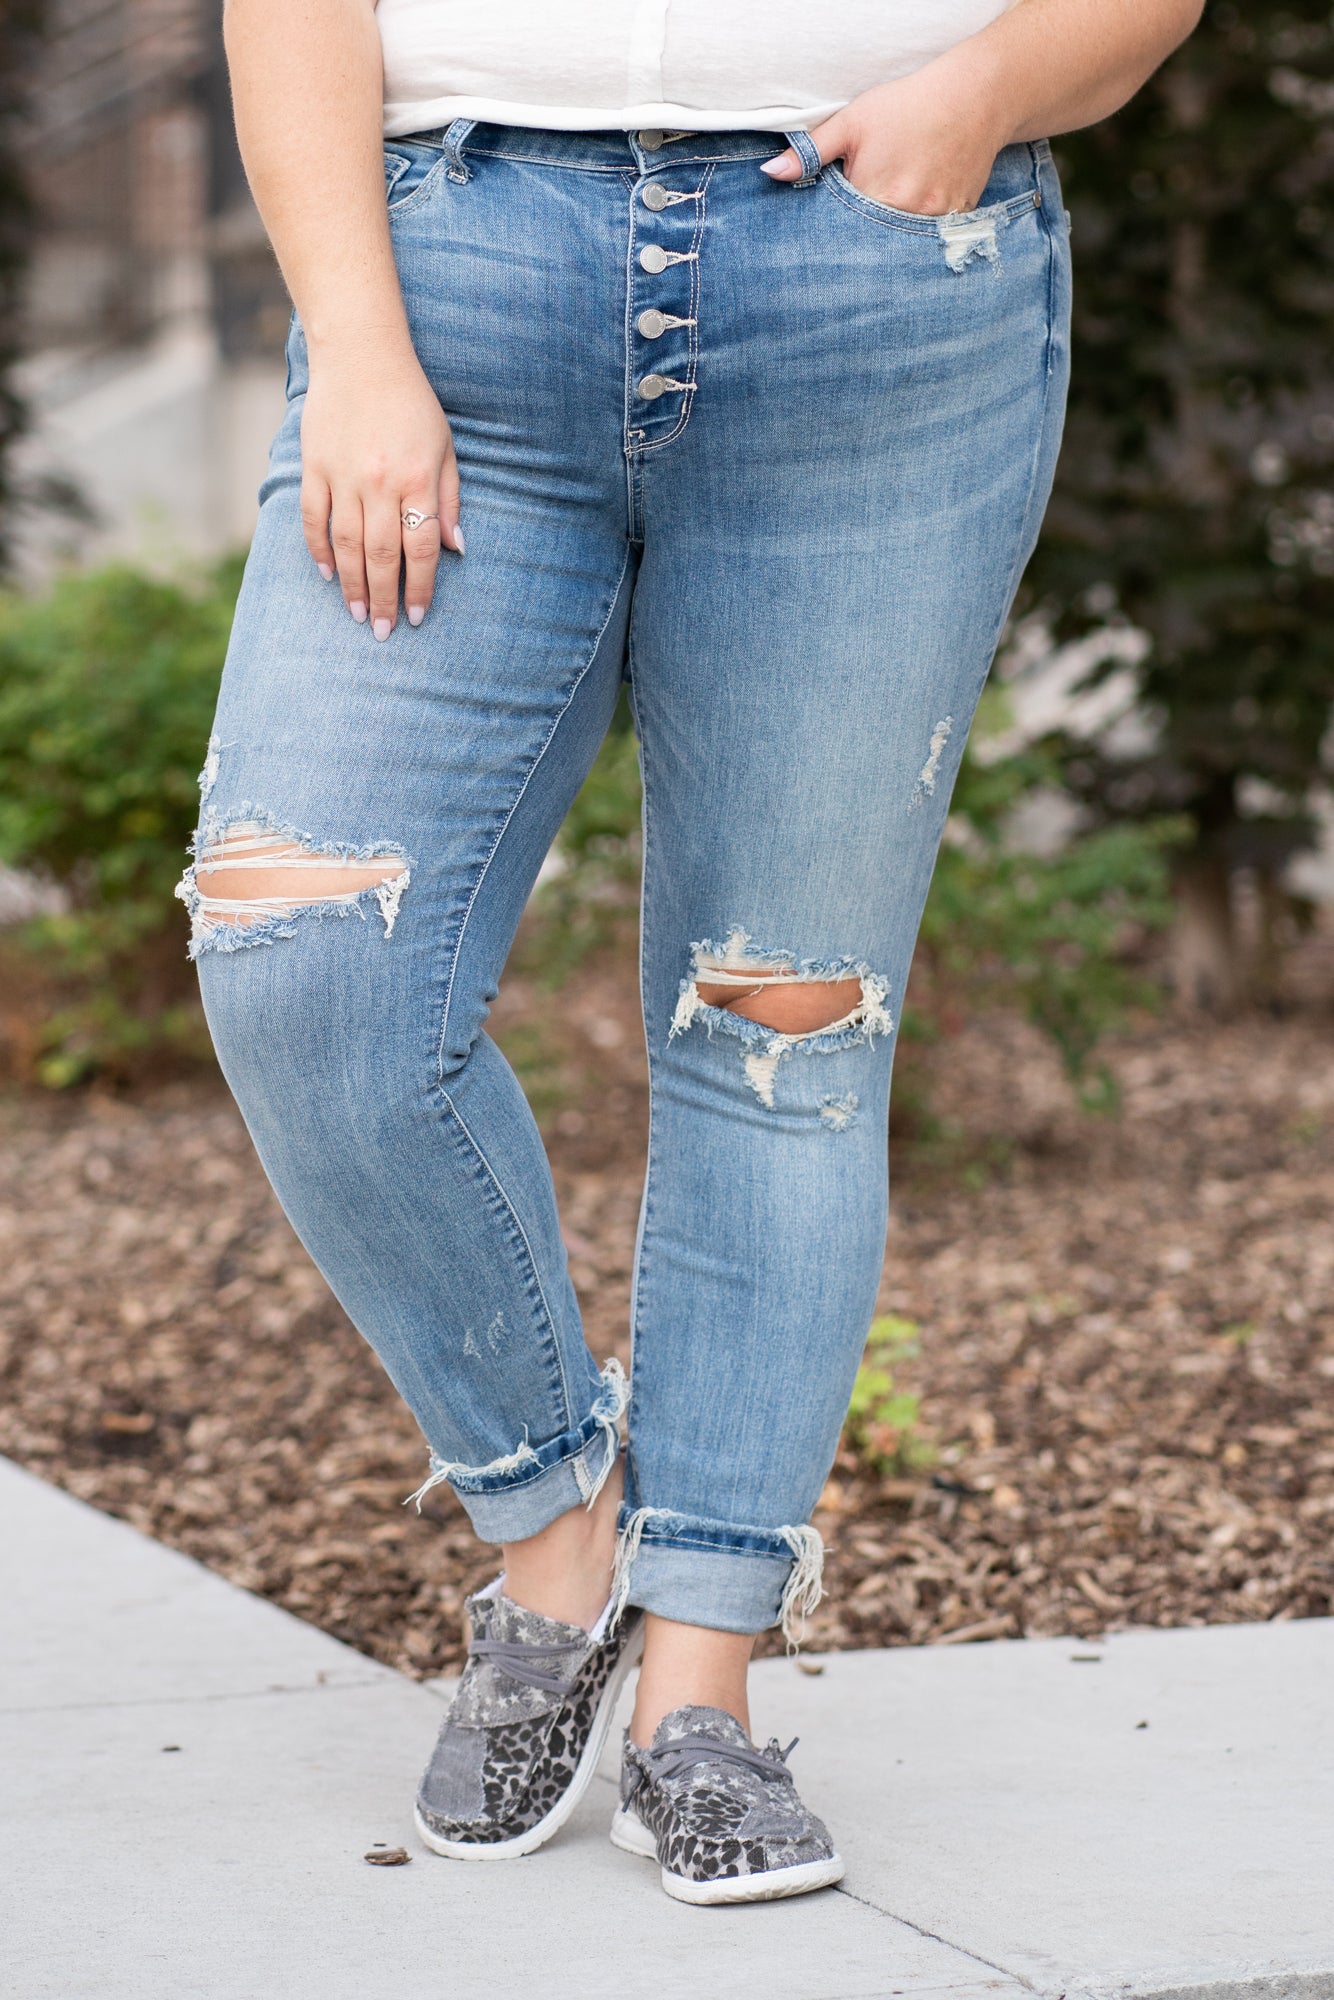 Judy Blue Collection: Spring 2021 Color: Medium Blue Wash Cut: Boyfriend, 26.5" Inseam Cuffed Rise: High-Rise. 10.5" Front Rise Material: 92% COTTON,6% POLYESTER,2% SPANDEX Machine Wash Separately In Cold Water Stitching: Classic Fly: Zipper Style #: JB82238-PL, 82238-PL Contact us for any additional measurements or sizing.